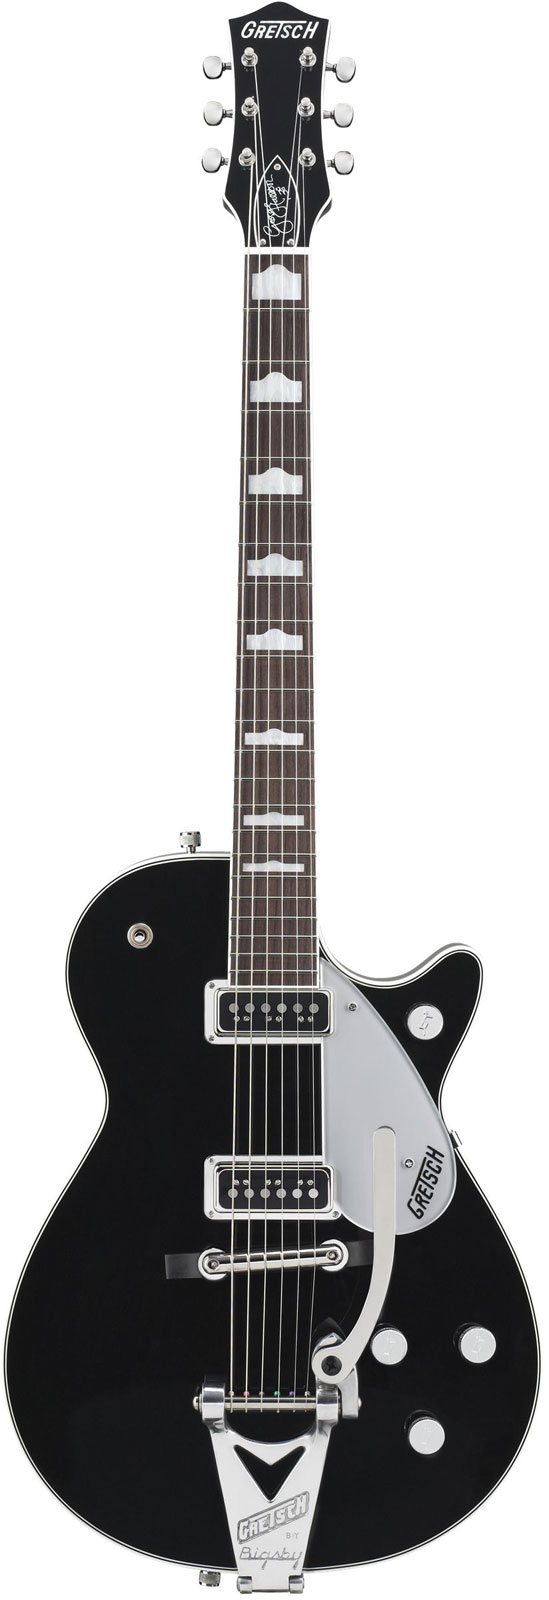 GRETSCH GUITARS G6128T-GH GEORGE HARRISON SIGNATURE DUO JET WITH BIGSBY RW, BLACK